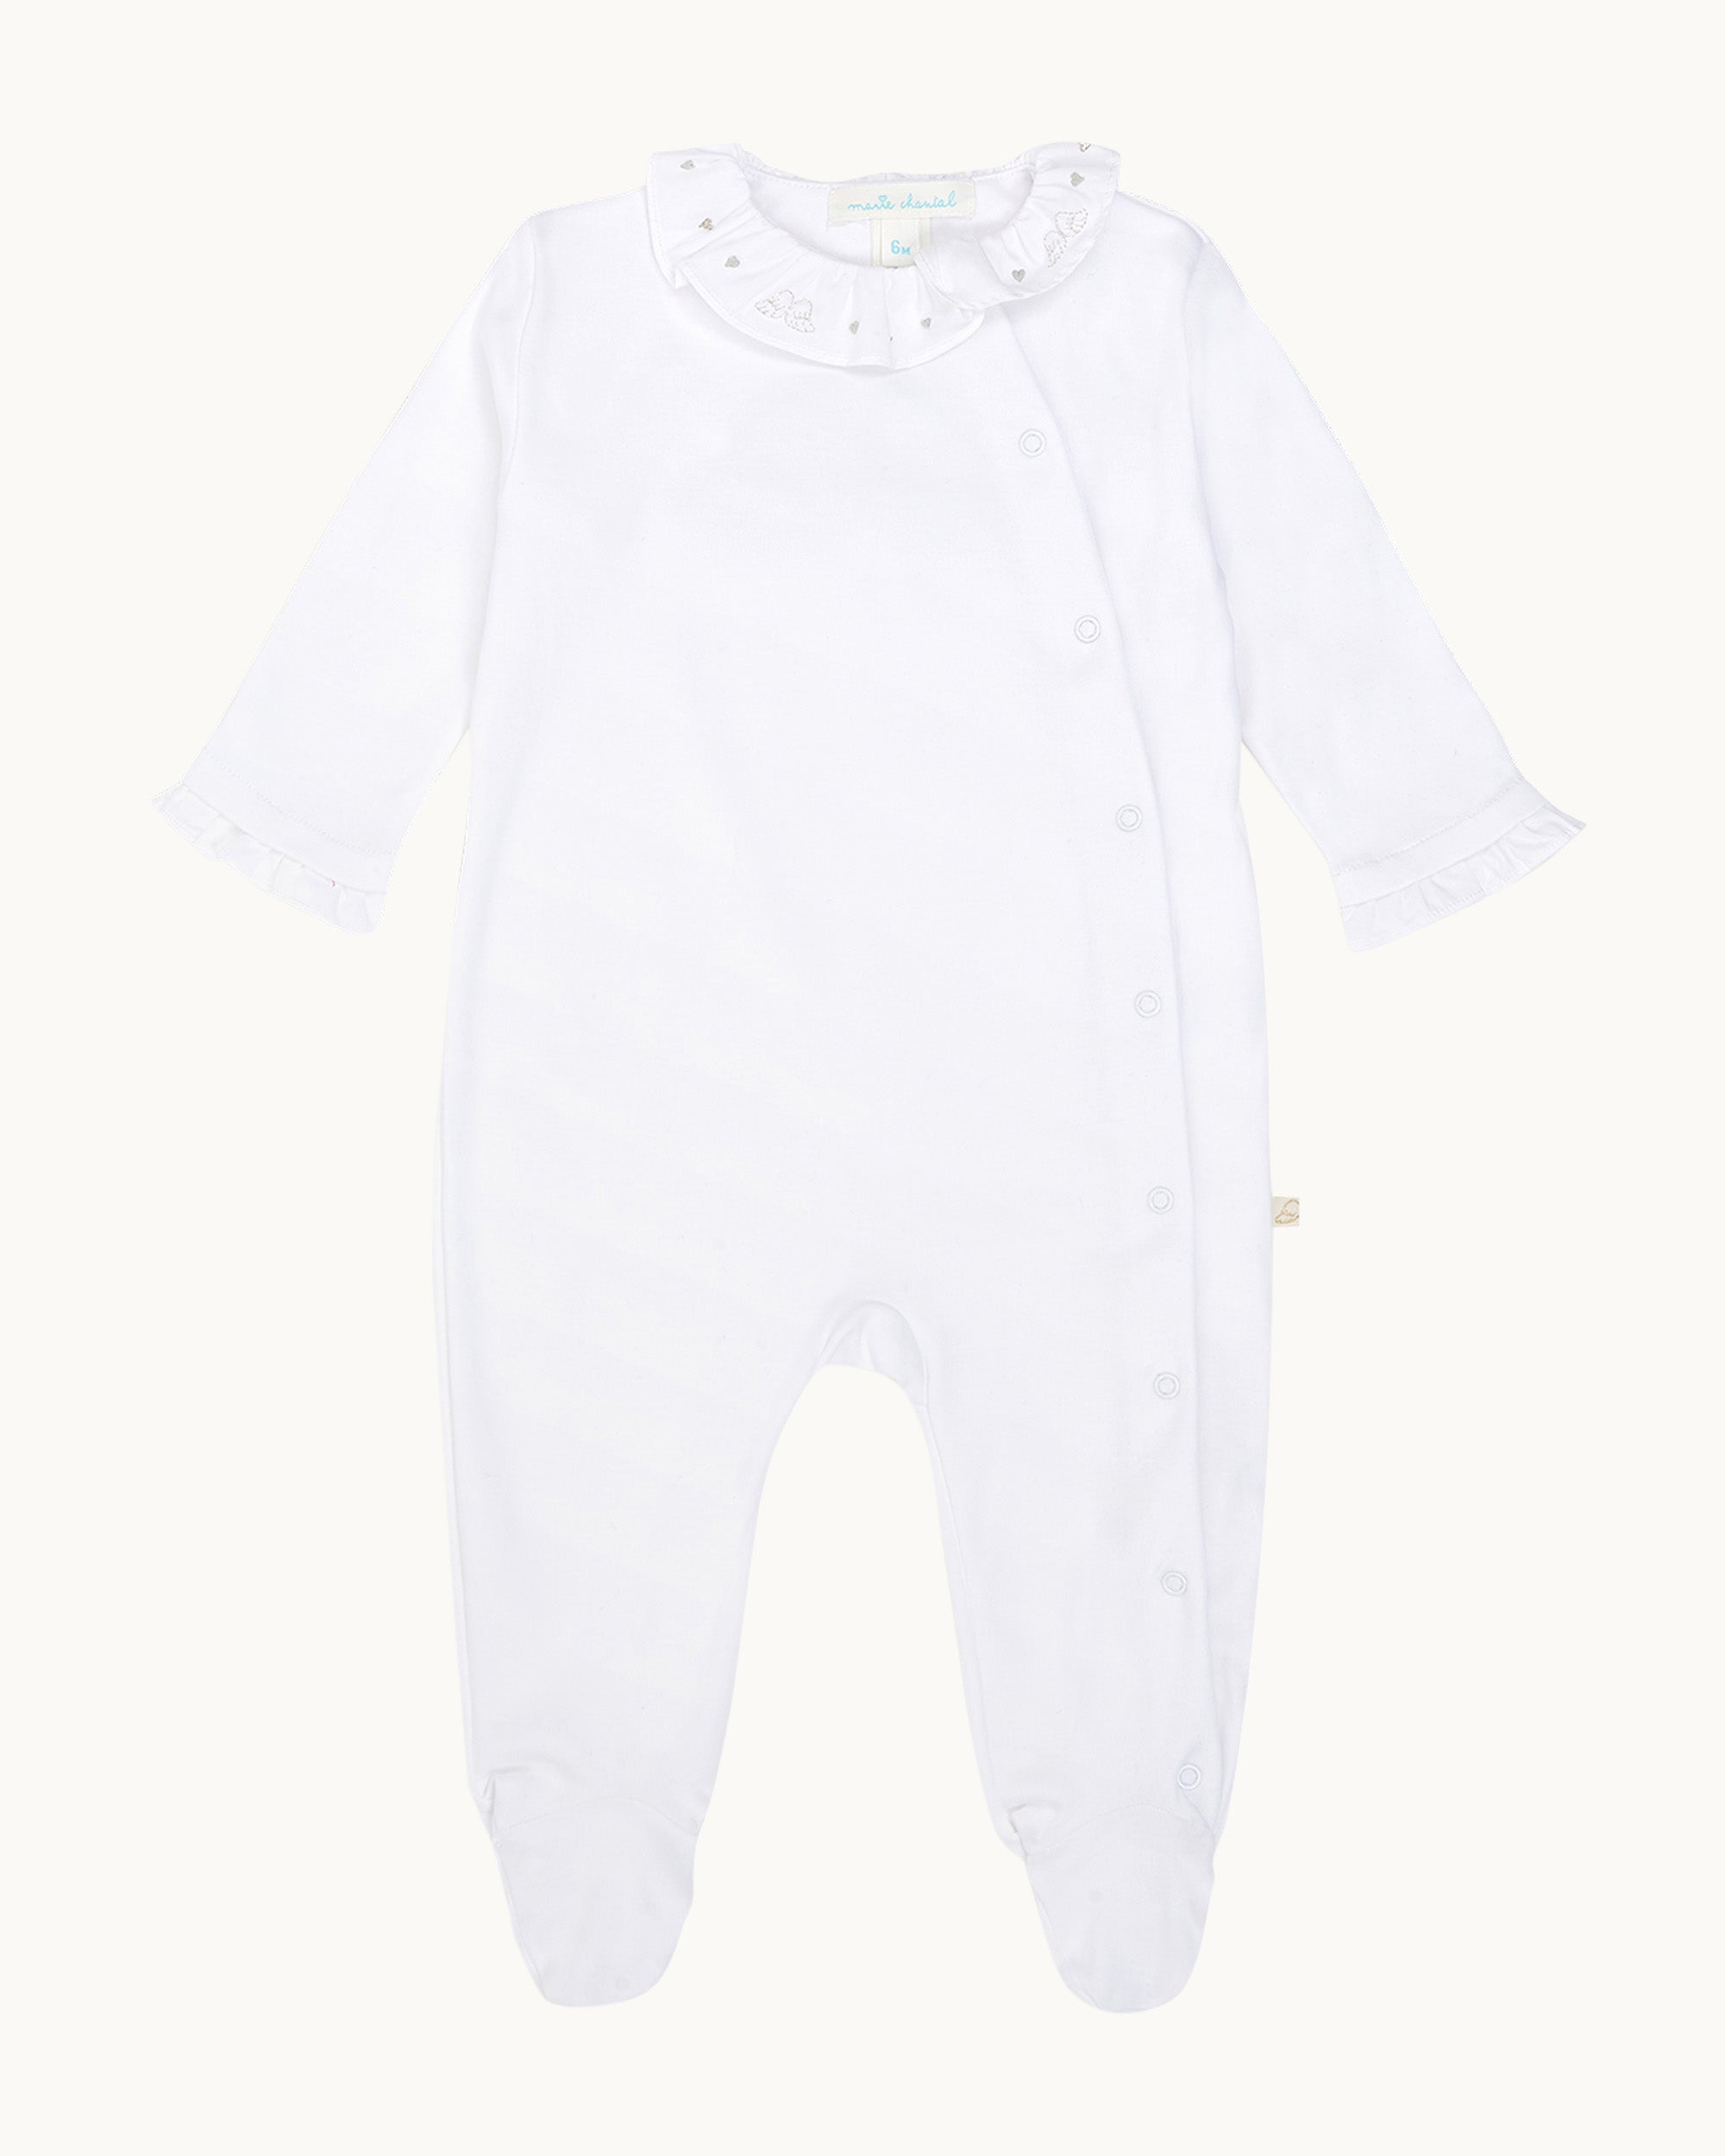 Angel Wing™ Pima Cotton Silver Sleepsuit - White & Silver